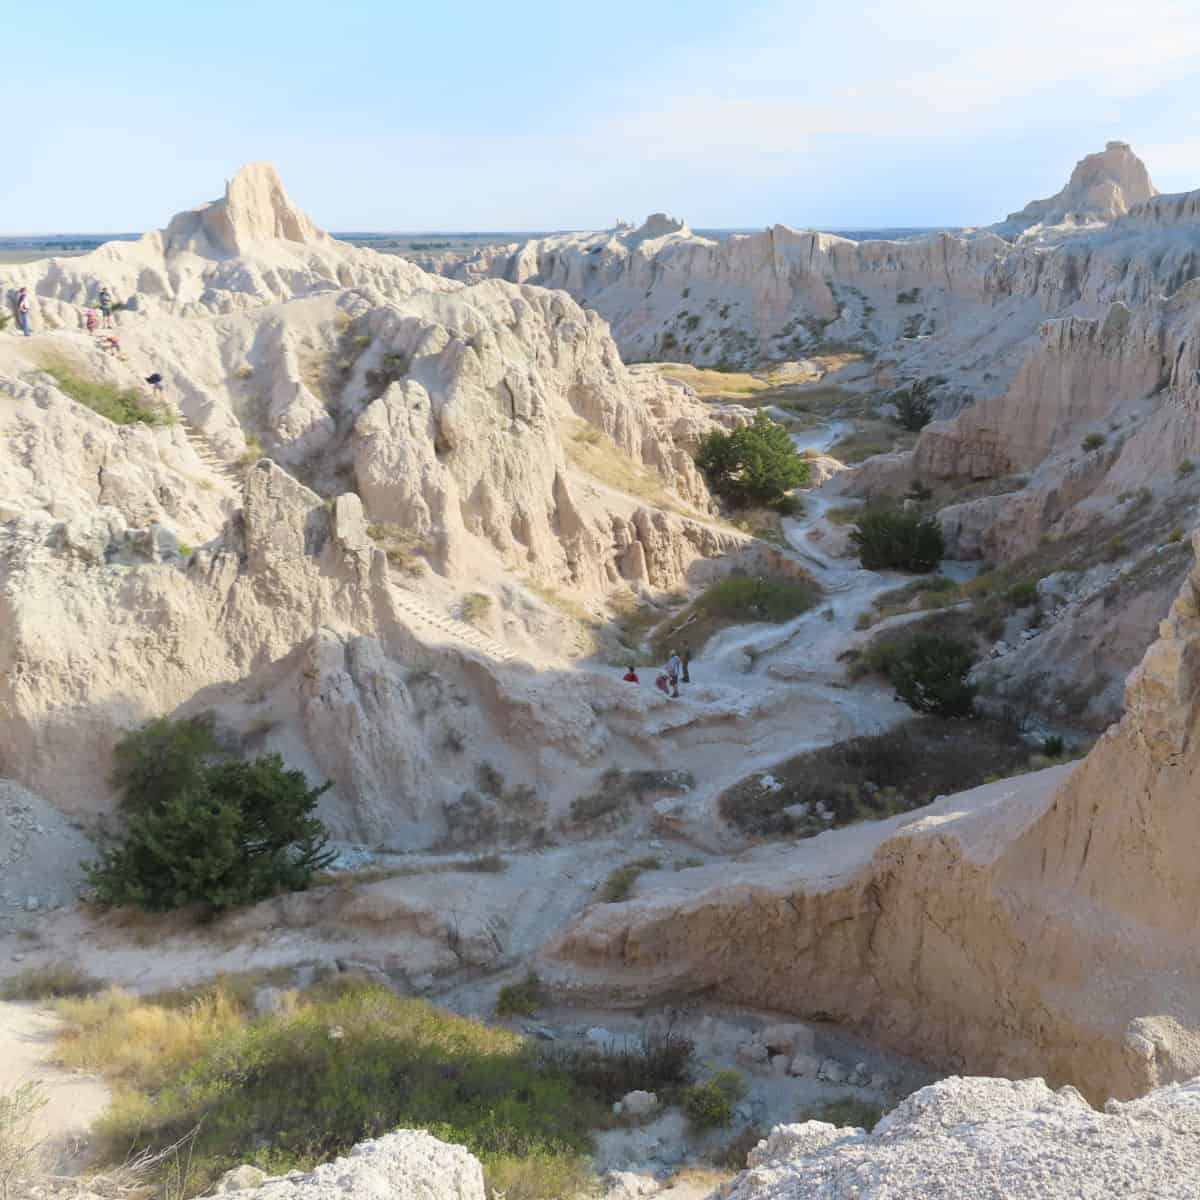 Spectacular views from the Notch Trail in Badlands National Park